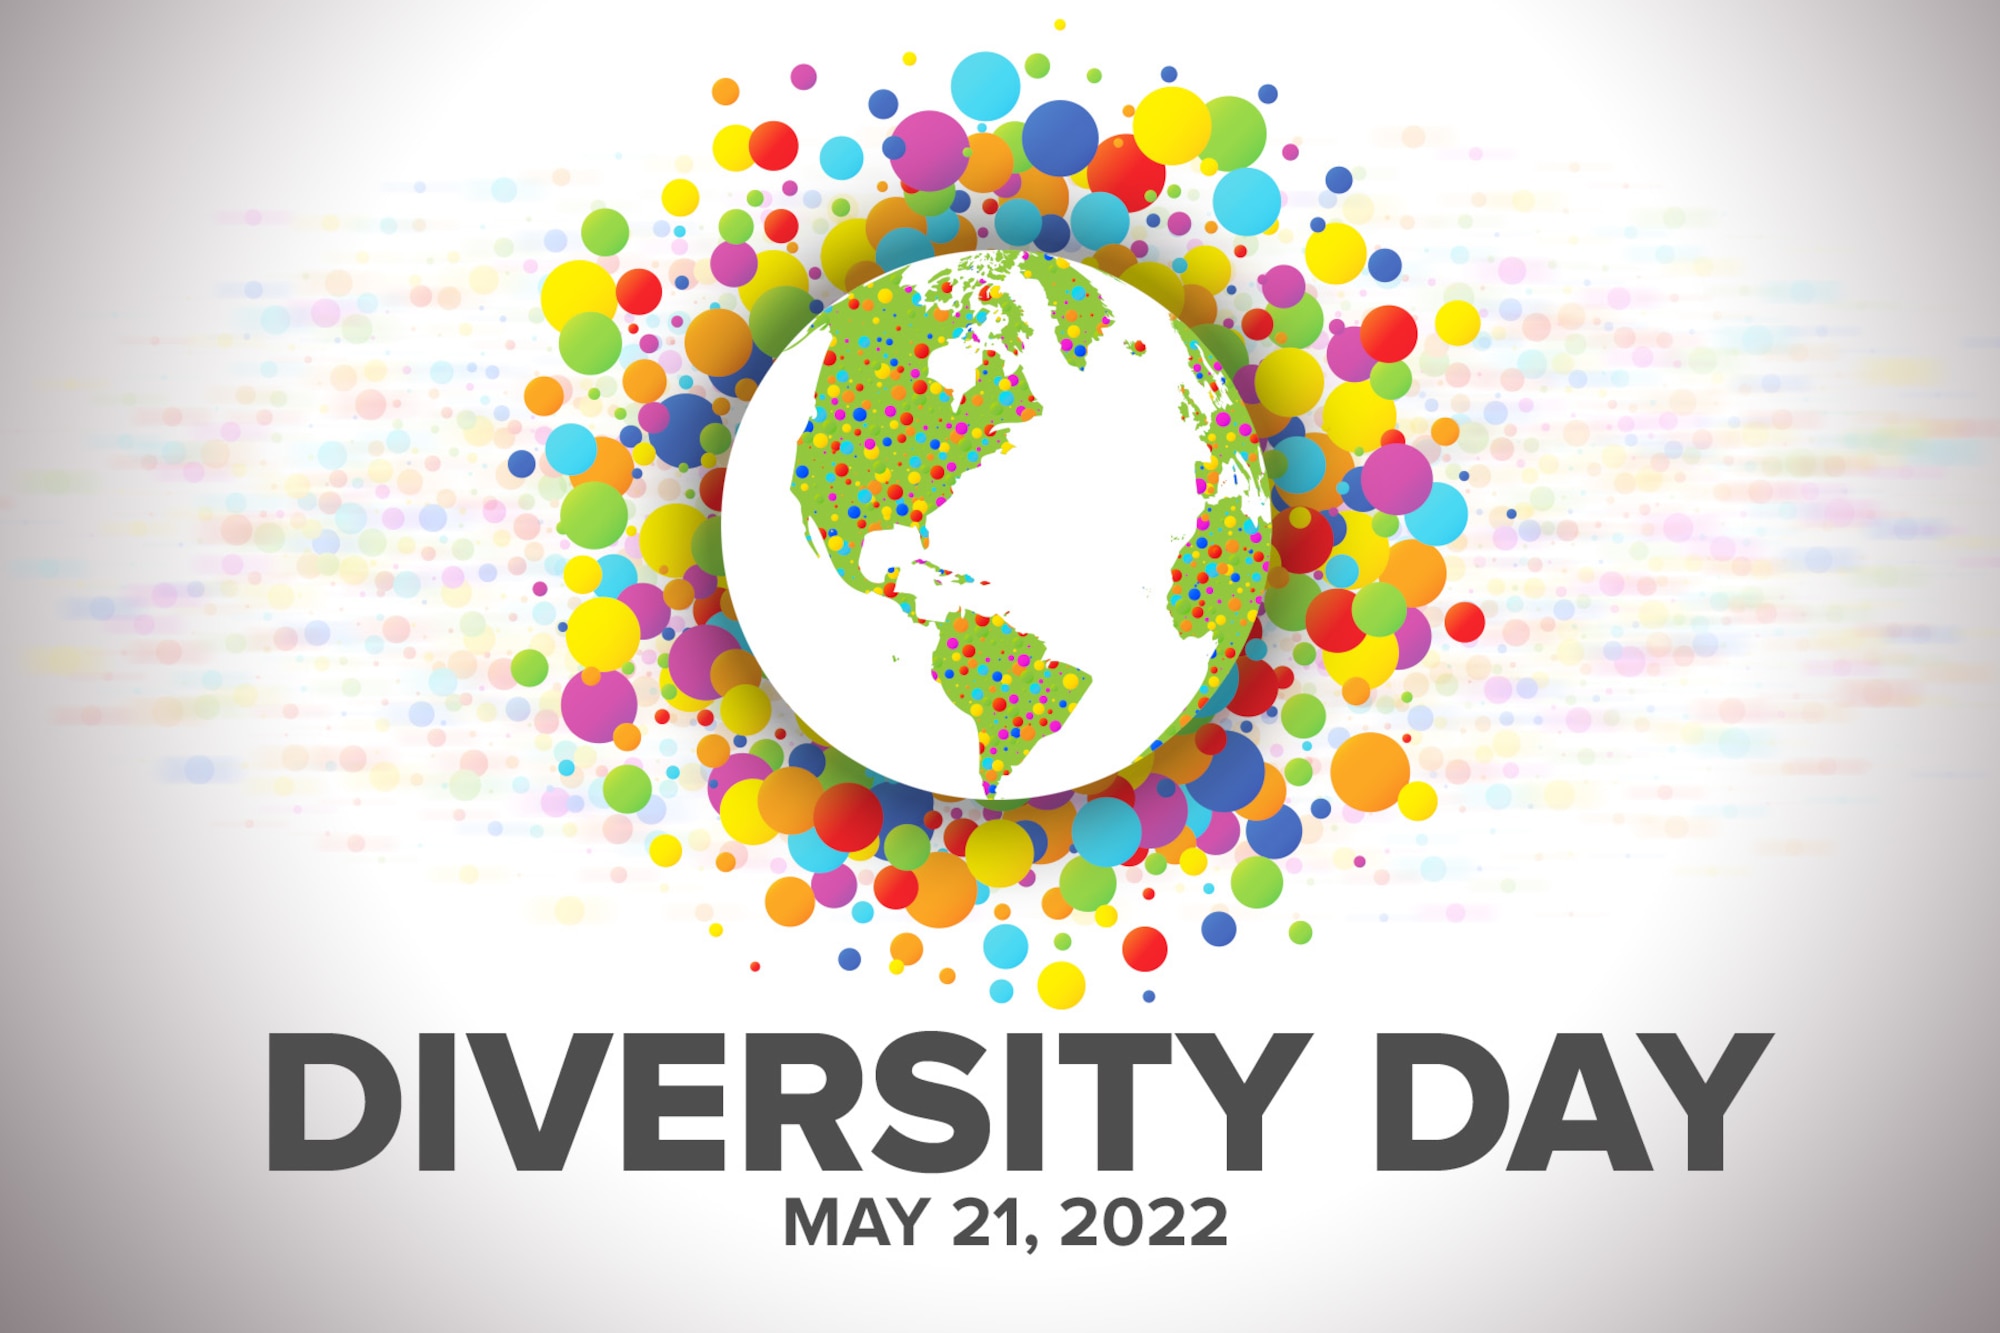 Whether we visit another city, state, or country, diversity is what makes the world unique and fascinating. Each year we recognize World Day for Cultural Diversity for Dialogue and Development, or Diversity Day, on May 21.

This day is set aside to urge every person to do their part in building the bridge between cultures.

The United Nations first declared May 21 World Day for Cultural Diversity for Dialogue and Development in 2002. In 2005, the United Nations Educational, Scientific, and Cultural Organization encouraged the world to develop empathy for the tenets of cultural diversity to achieve four goals.